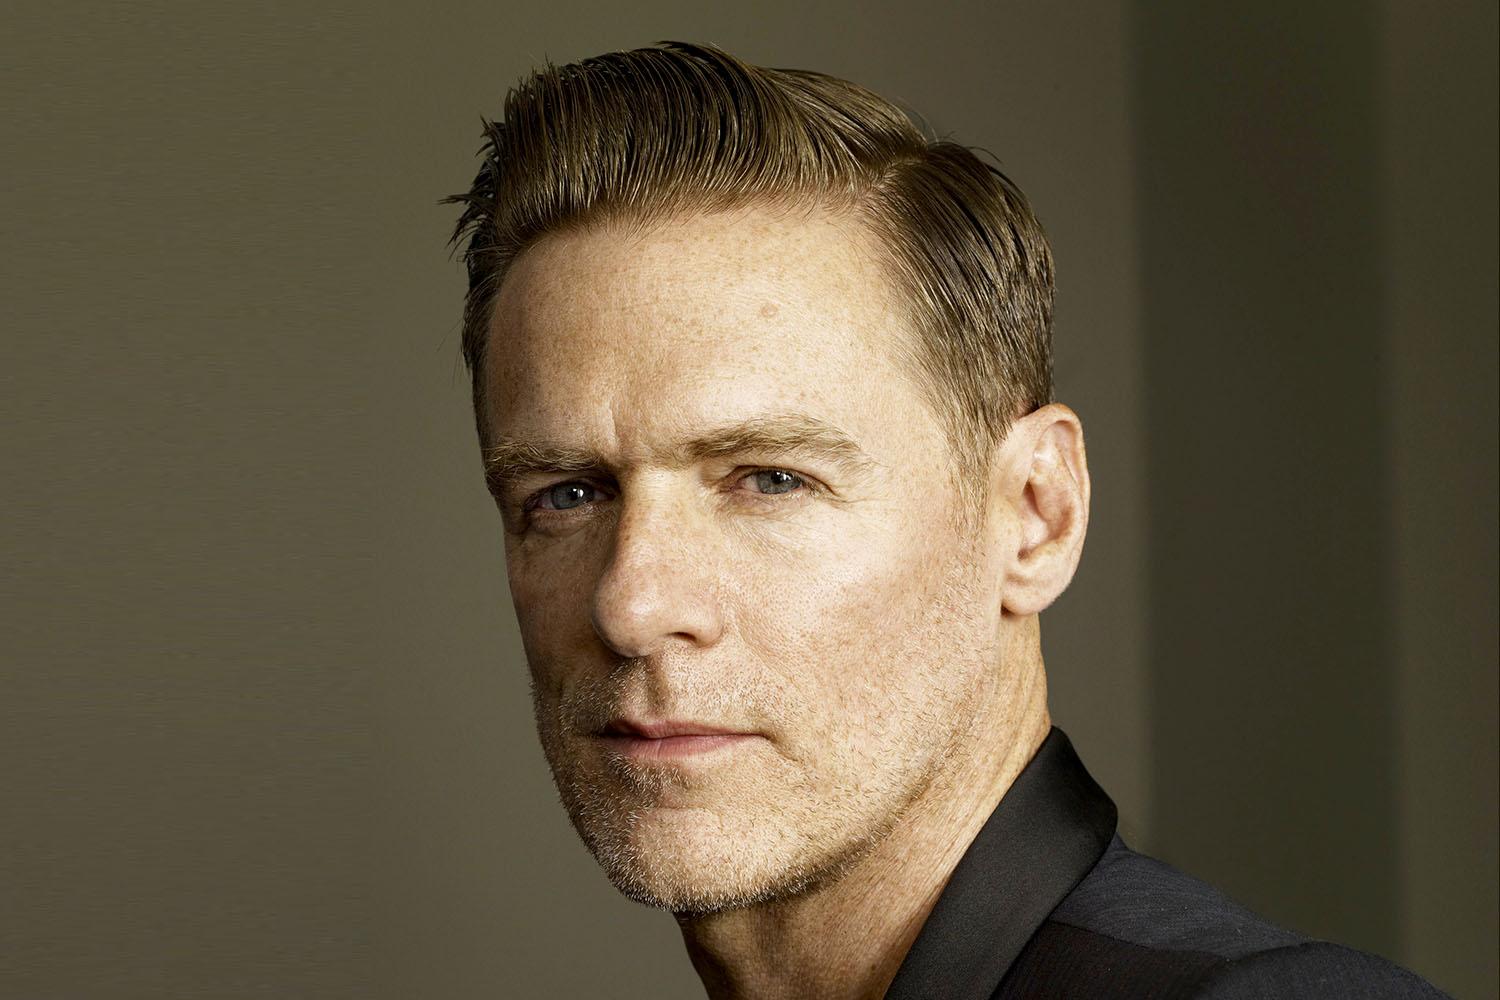 Bryan Adams and how women swoon for him over the decades